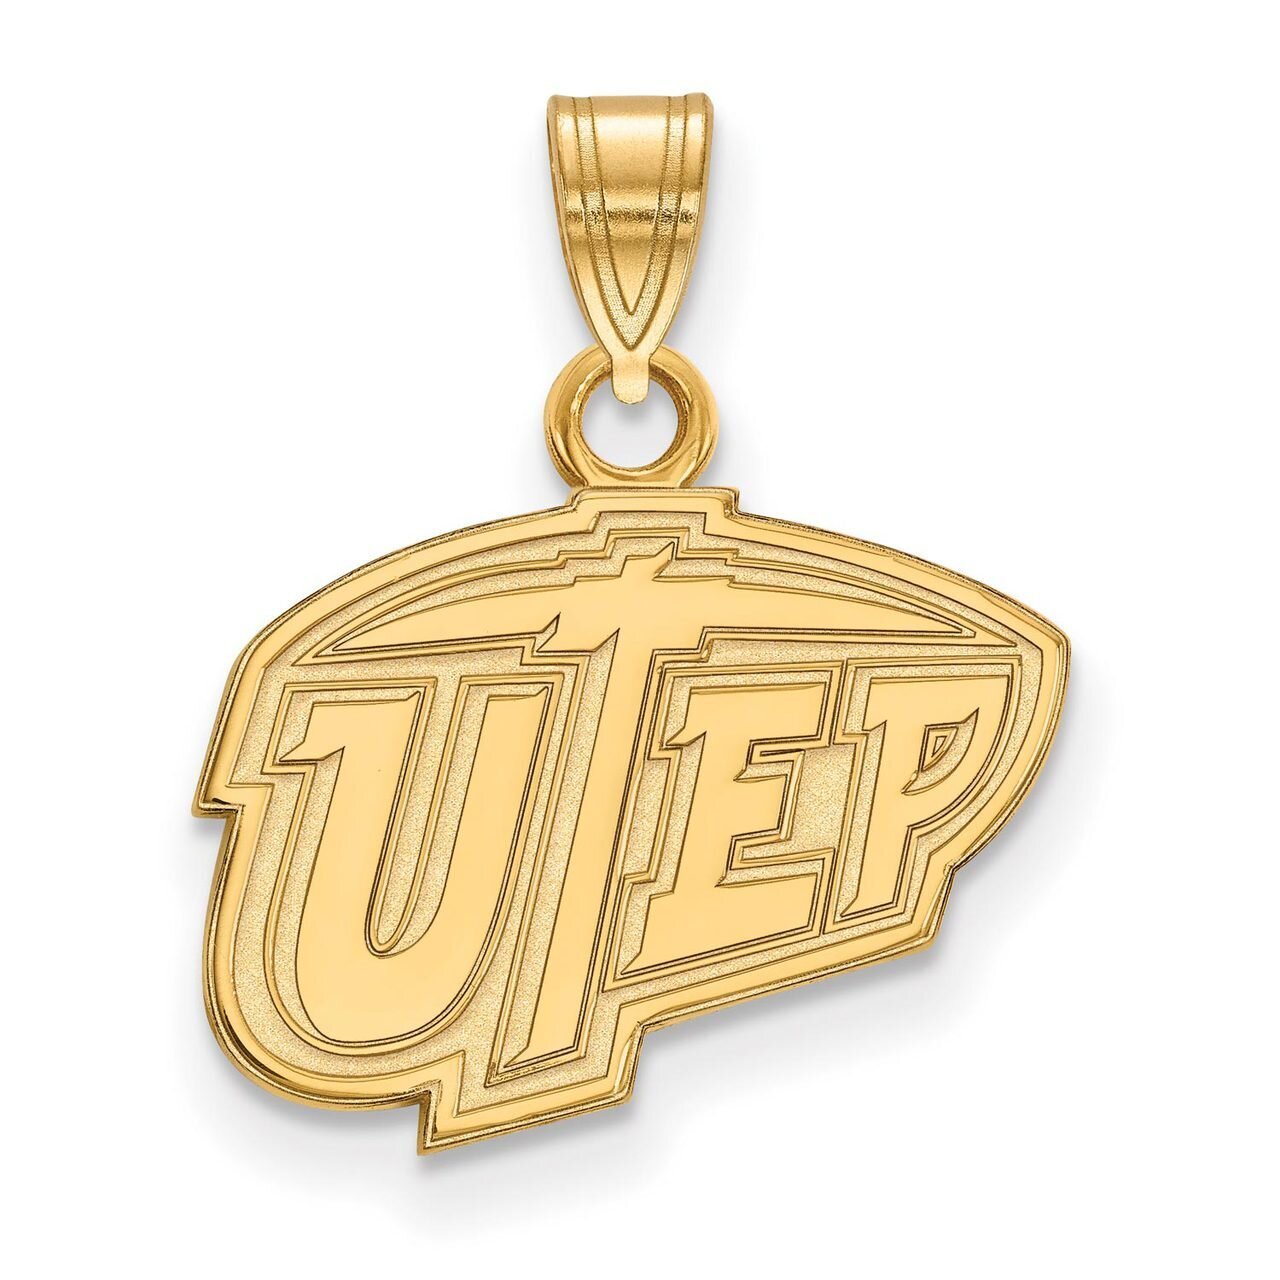 The University of Texas at El Paso Small Pendant 10k Yellow Gold 1Y001UTE